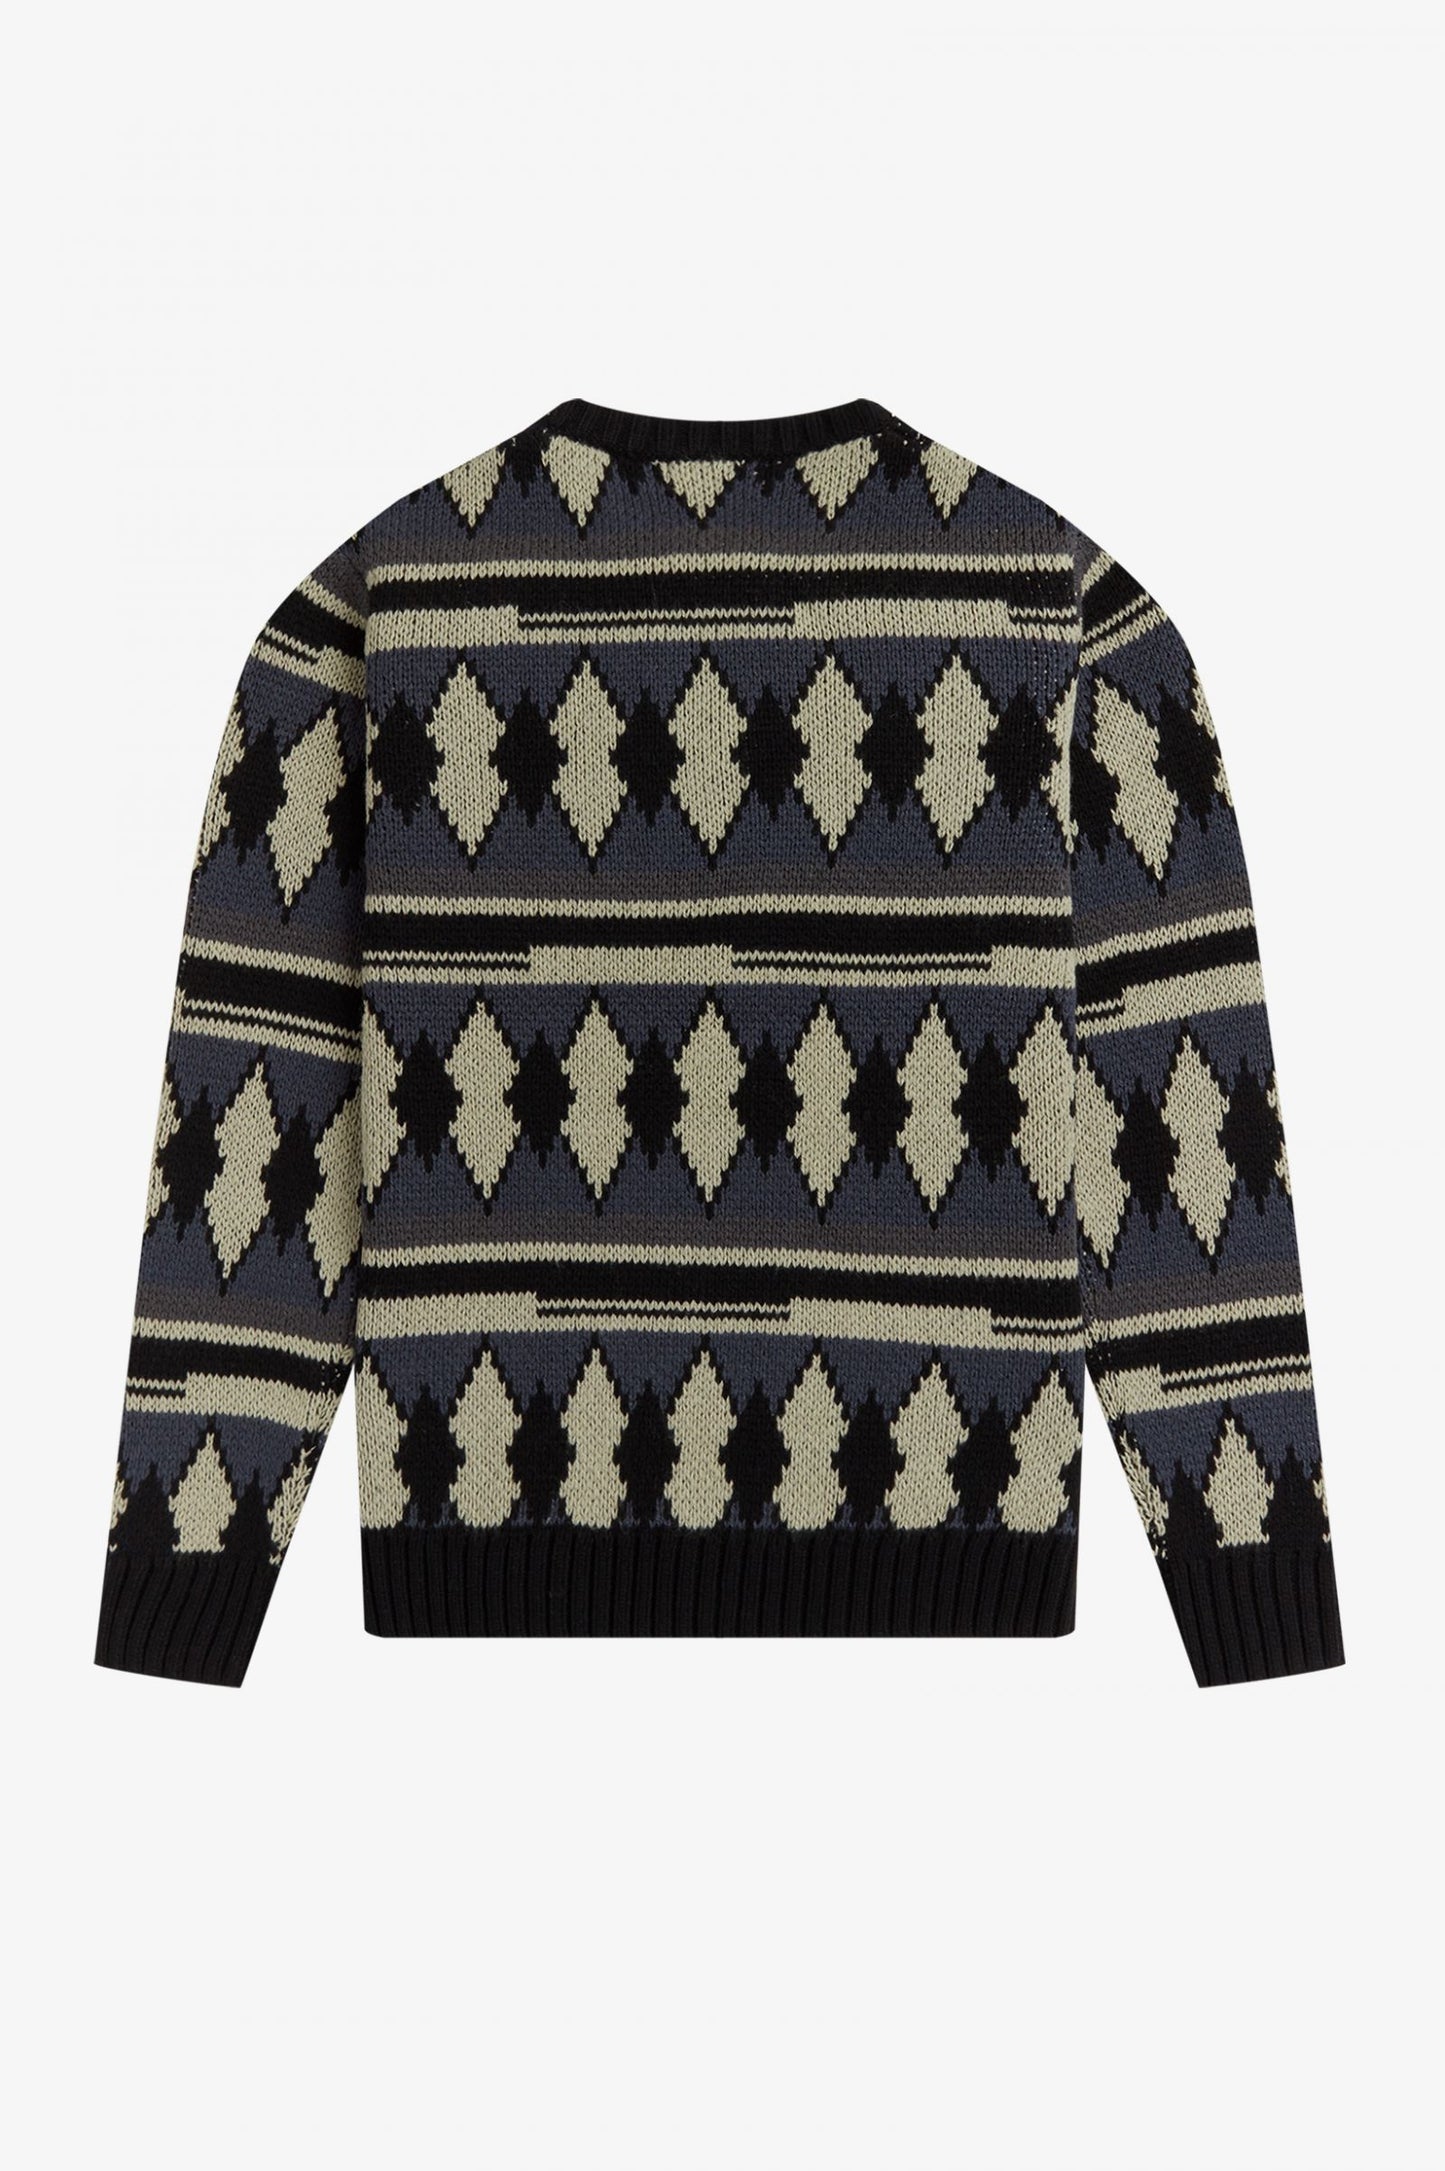 CHUNKY JACQUARD JUMPER BY FRED PERRY